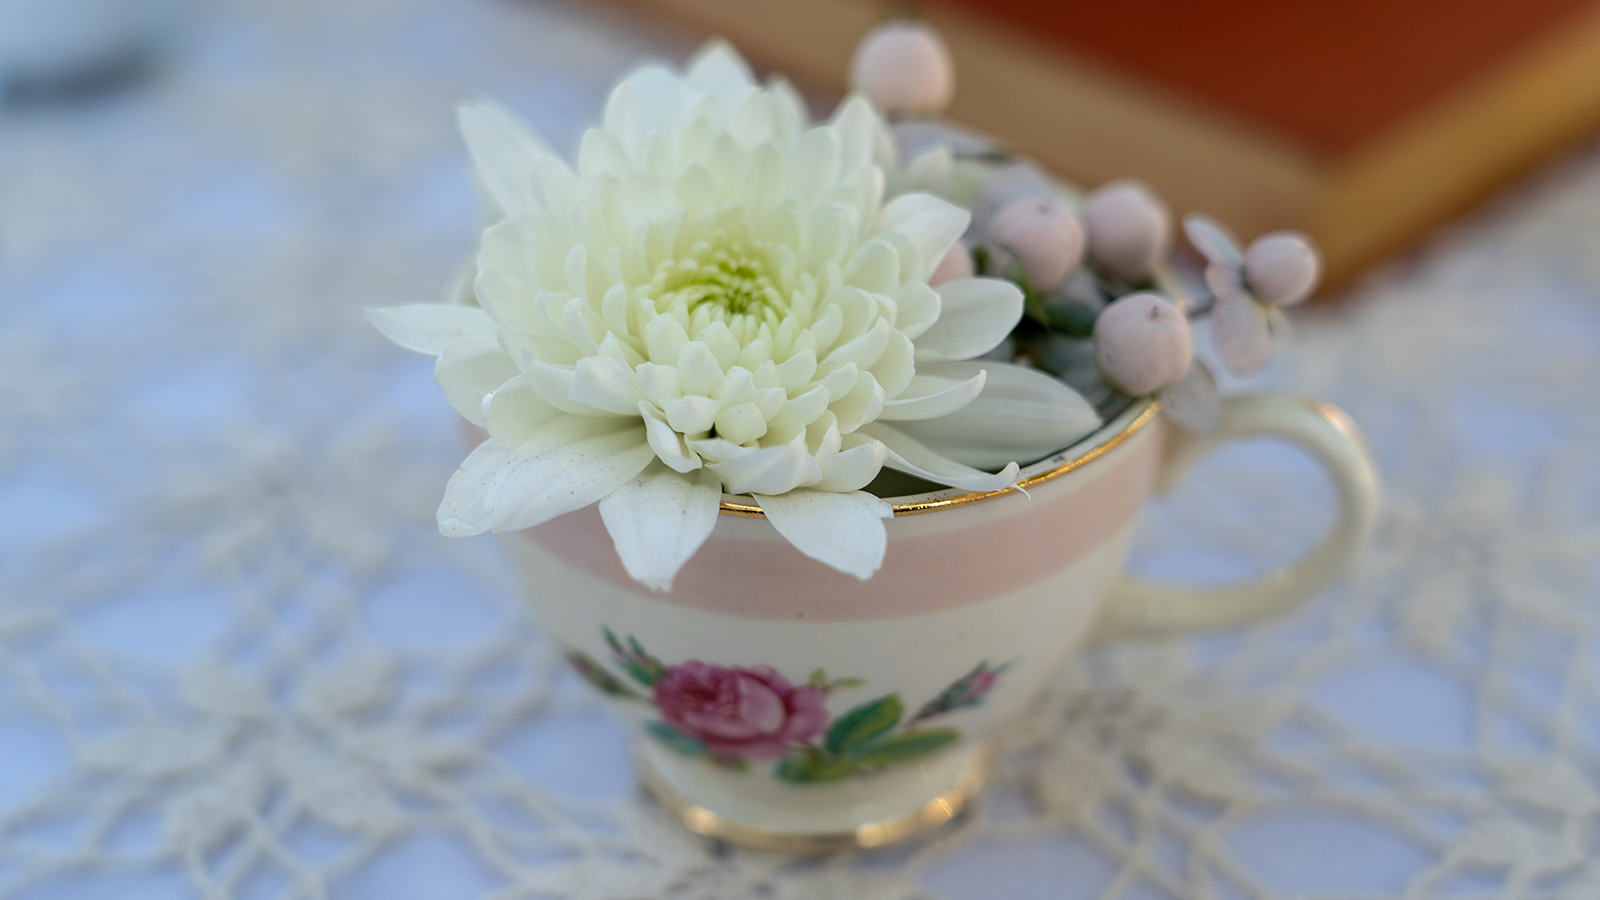 Wedding centerpiece for table in Spring